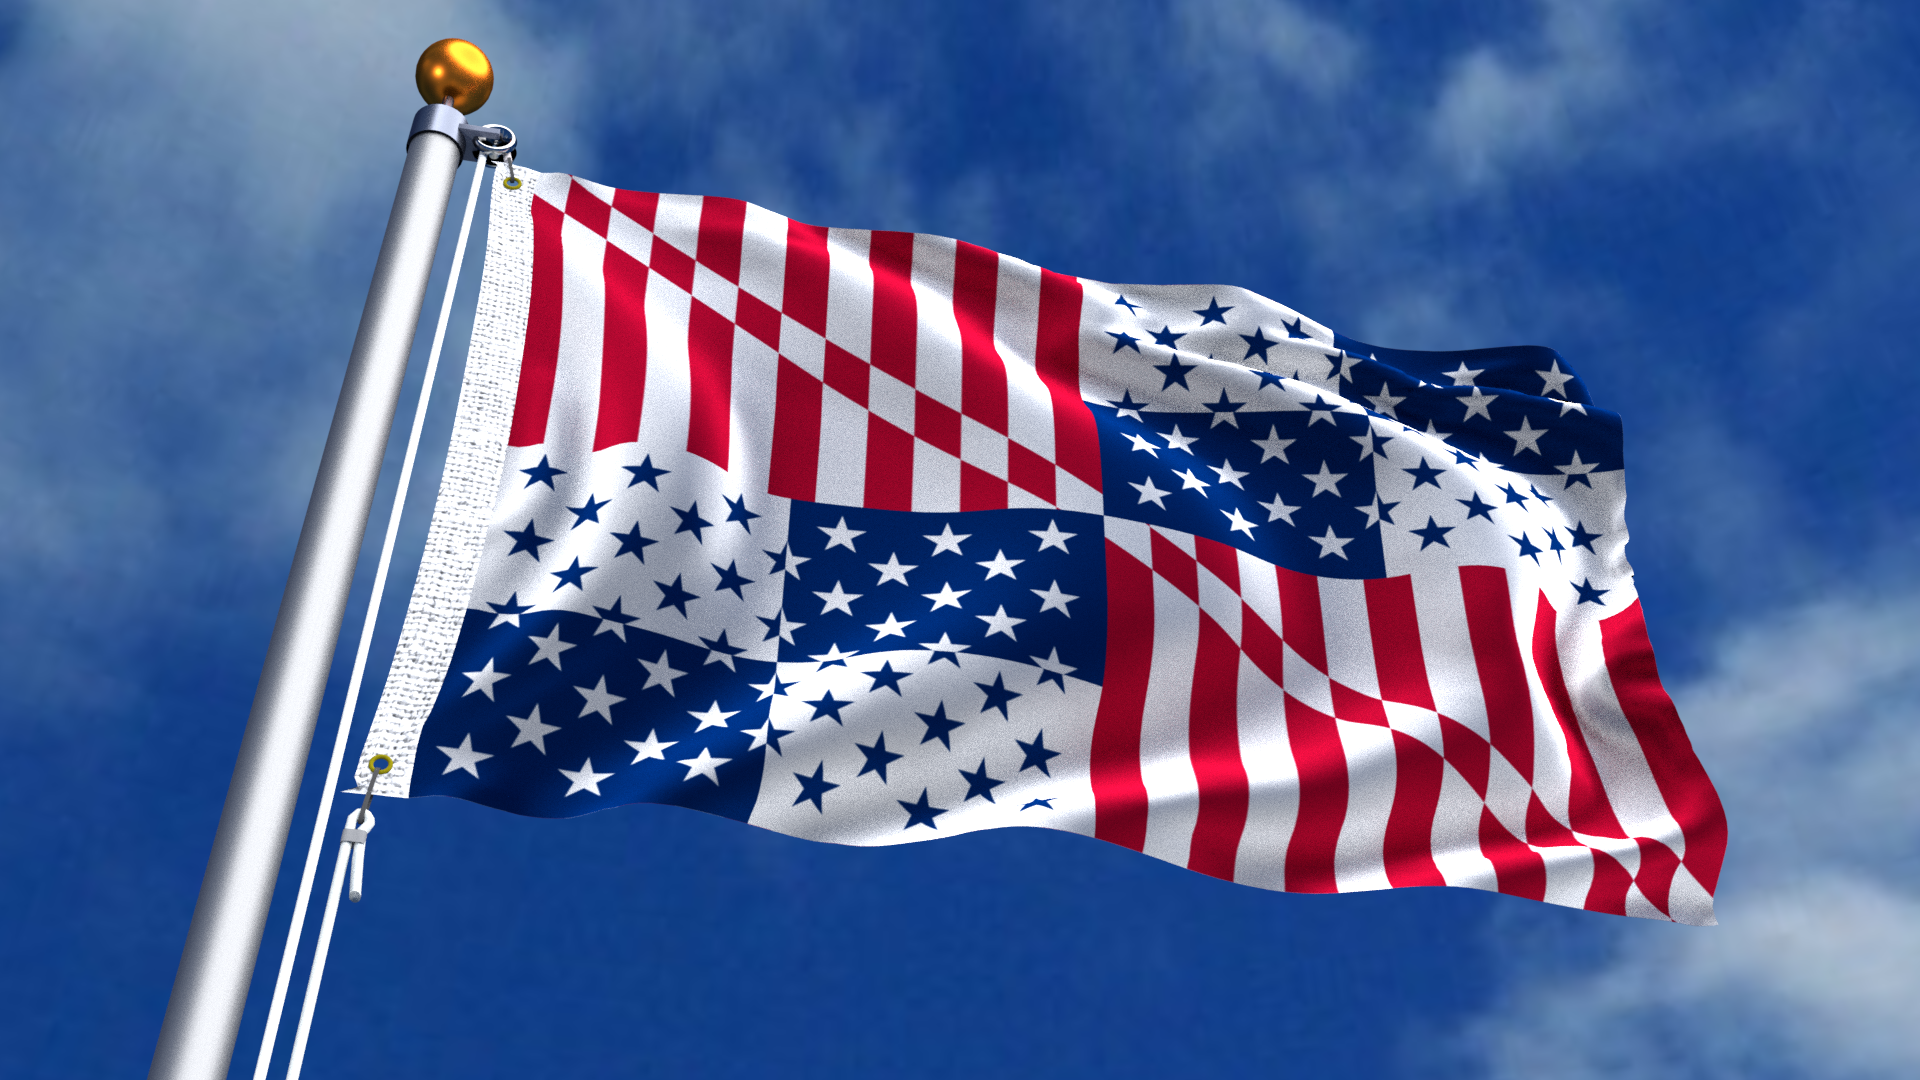 USA flag in the style of Marylandflat image linked in